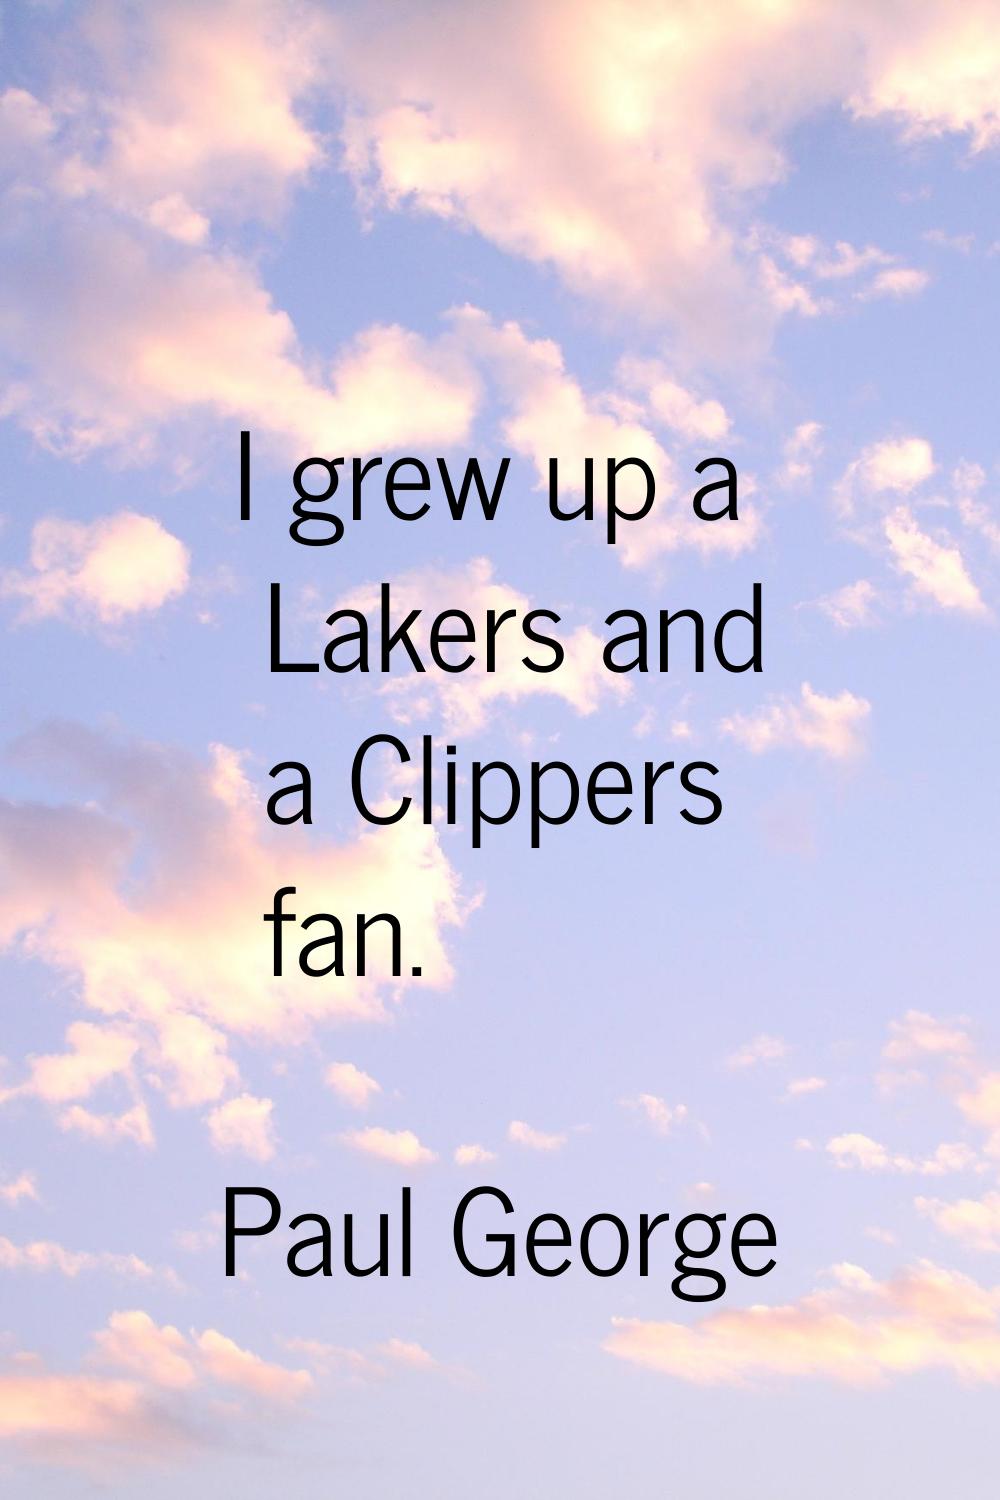 I grew up a Lakers and a Clippers fan.